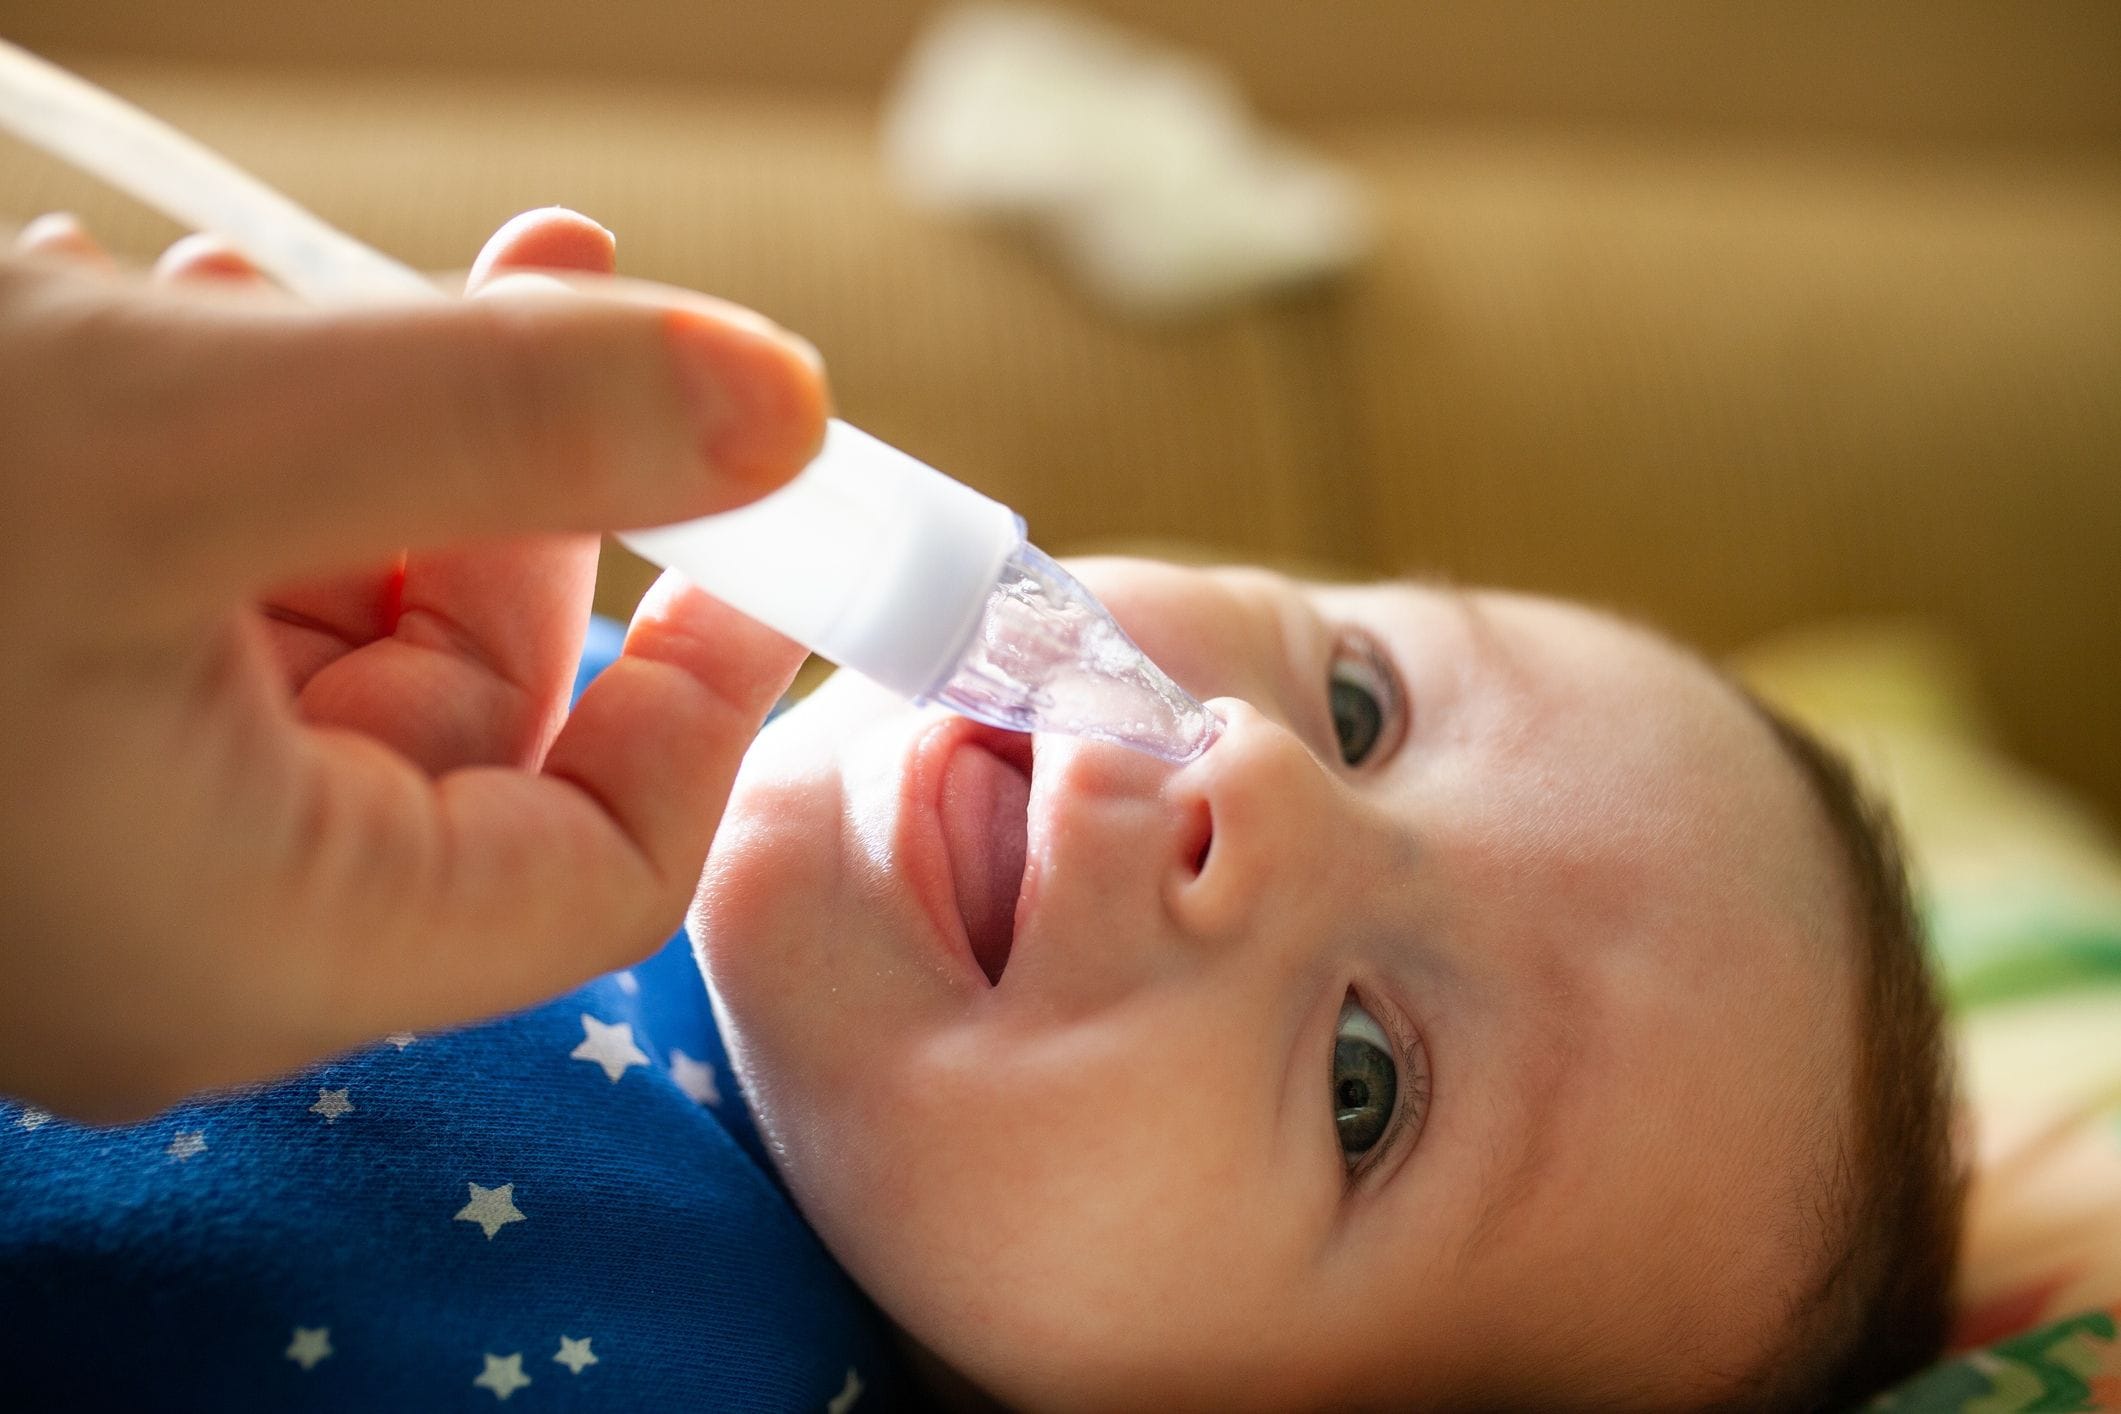 How To Syringe Feed A Baby? 10 Steps To Follow